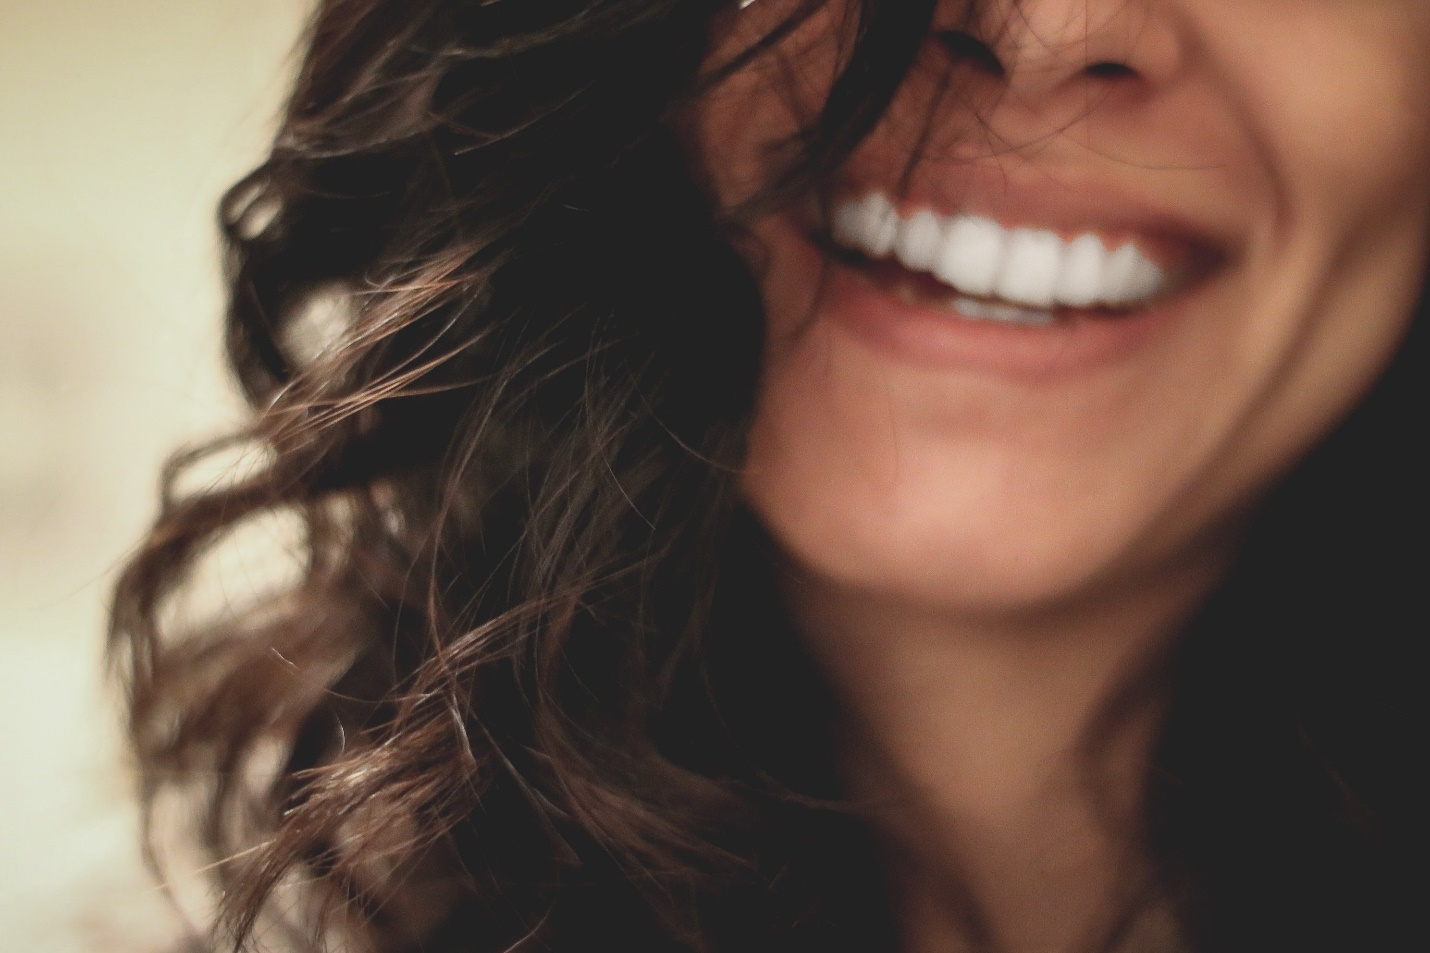 woman with healthy teeth and smile